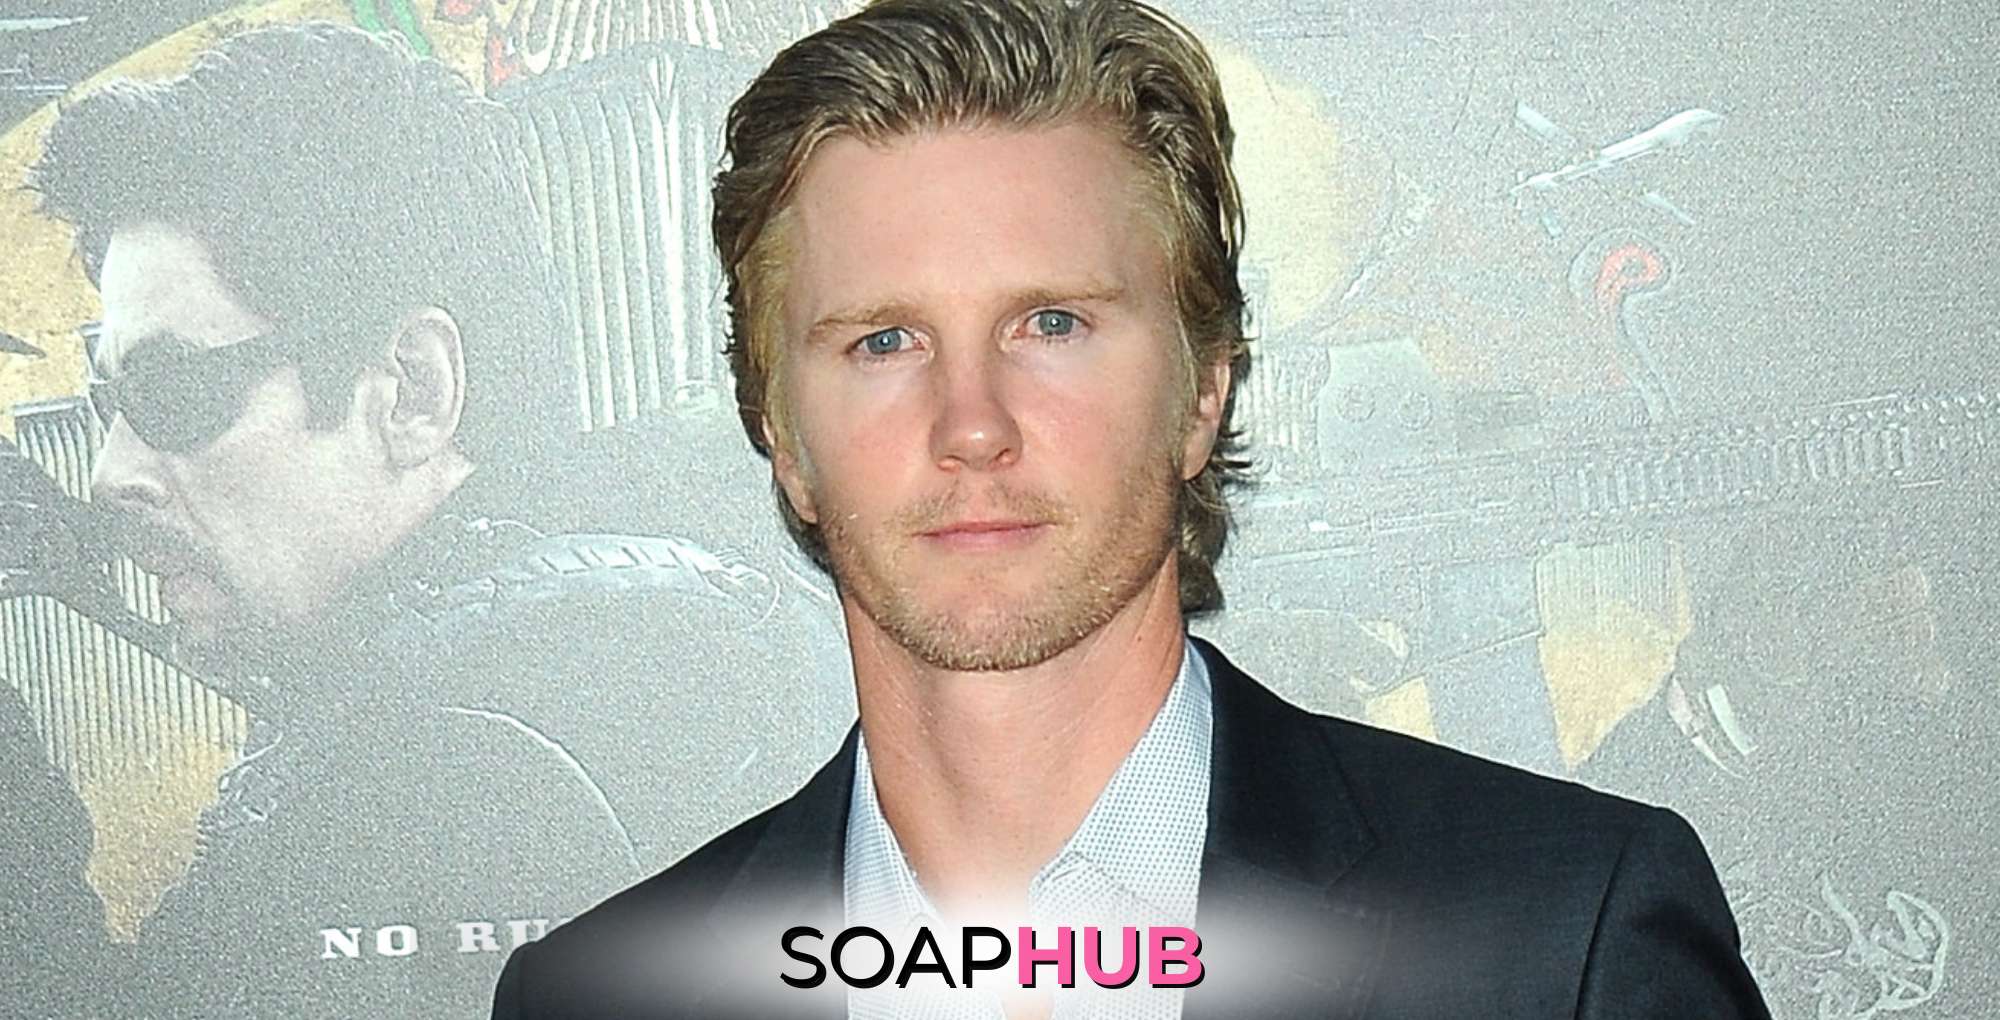 The Young and the Restless Alum Thad Luckinbill Celebrated His Birthday